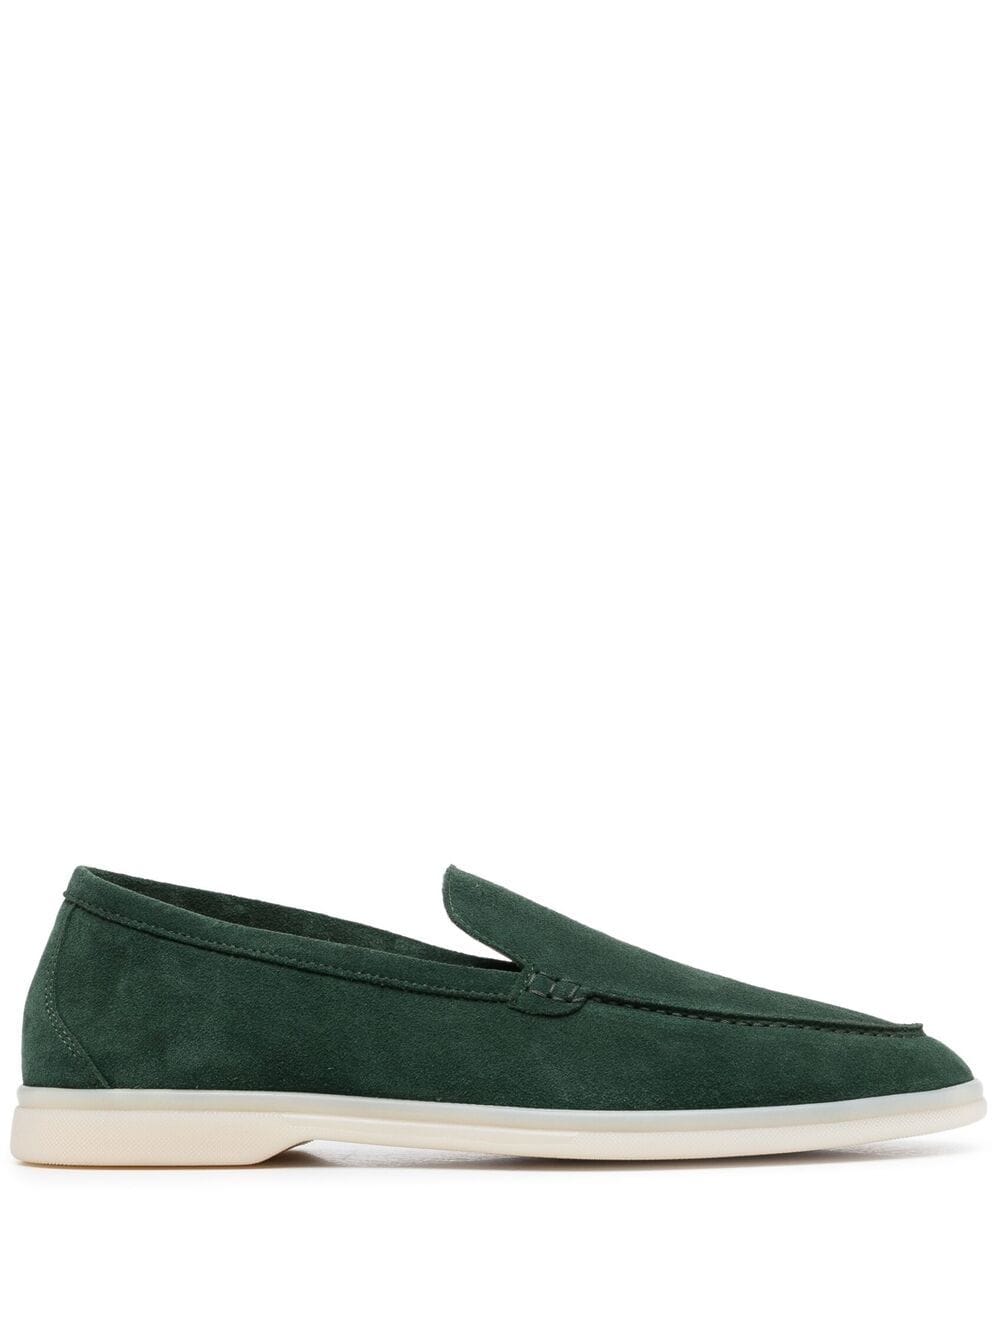 Scarosso Slip-on Loafers In Green